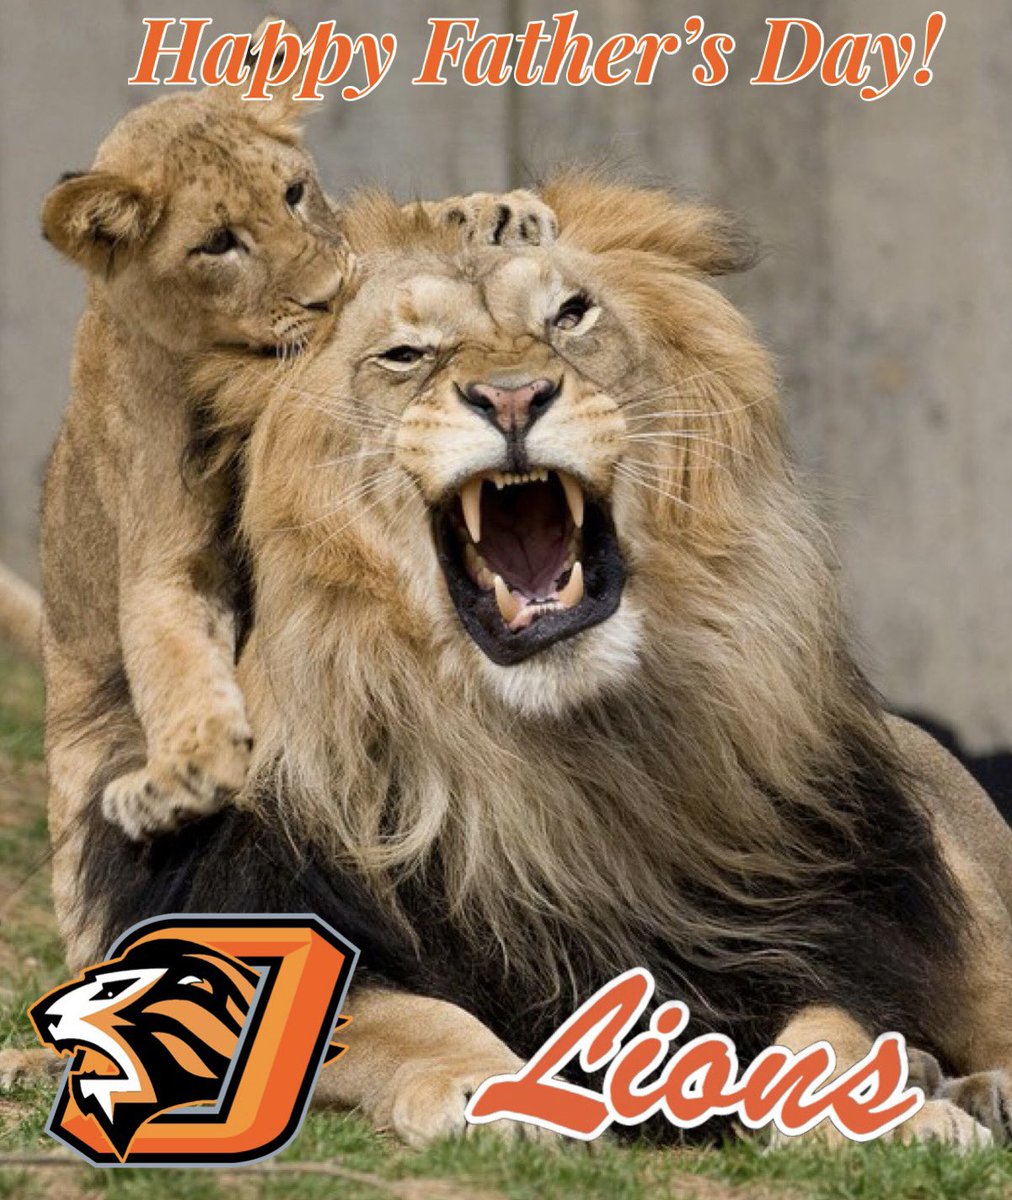 Happy Father’s Day!

To all of our Oviedo Lions Father’s, we wish you a relaxing and wonderful day! 

Thank you for all you do! 
#GoLions #FathersDay2023